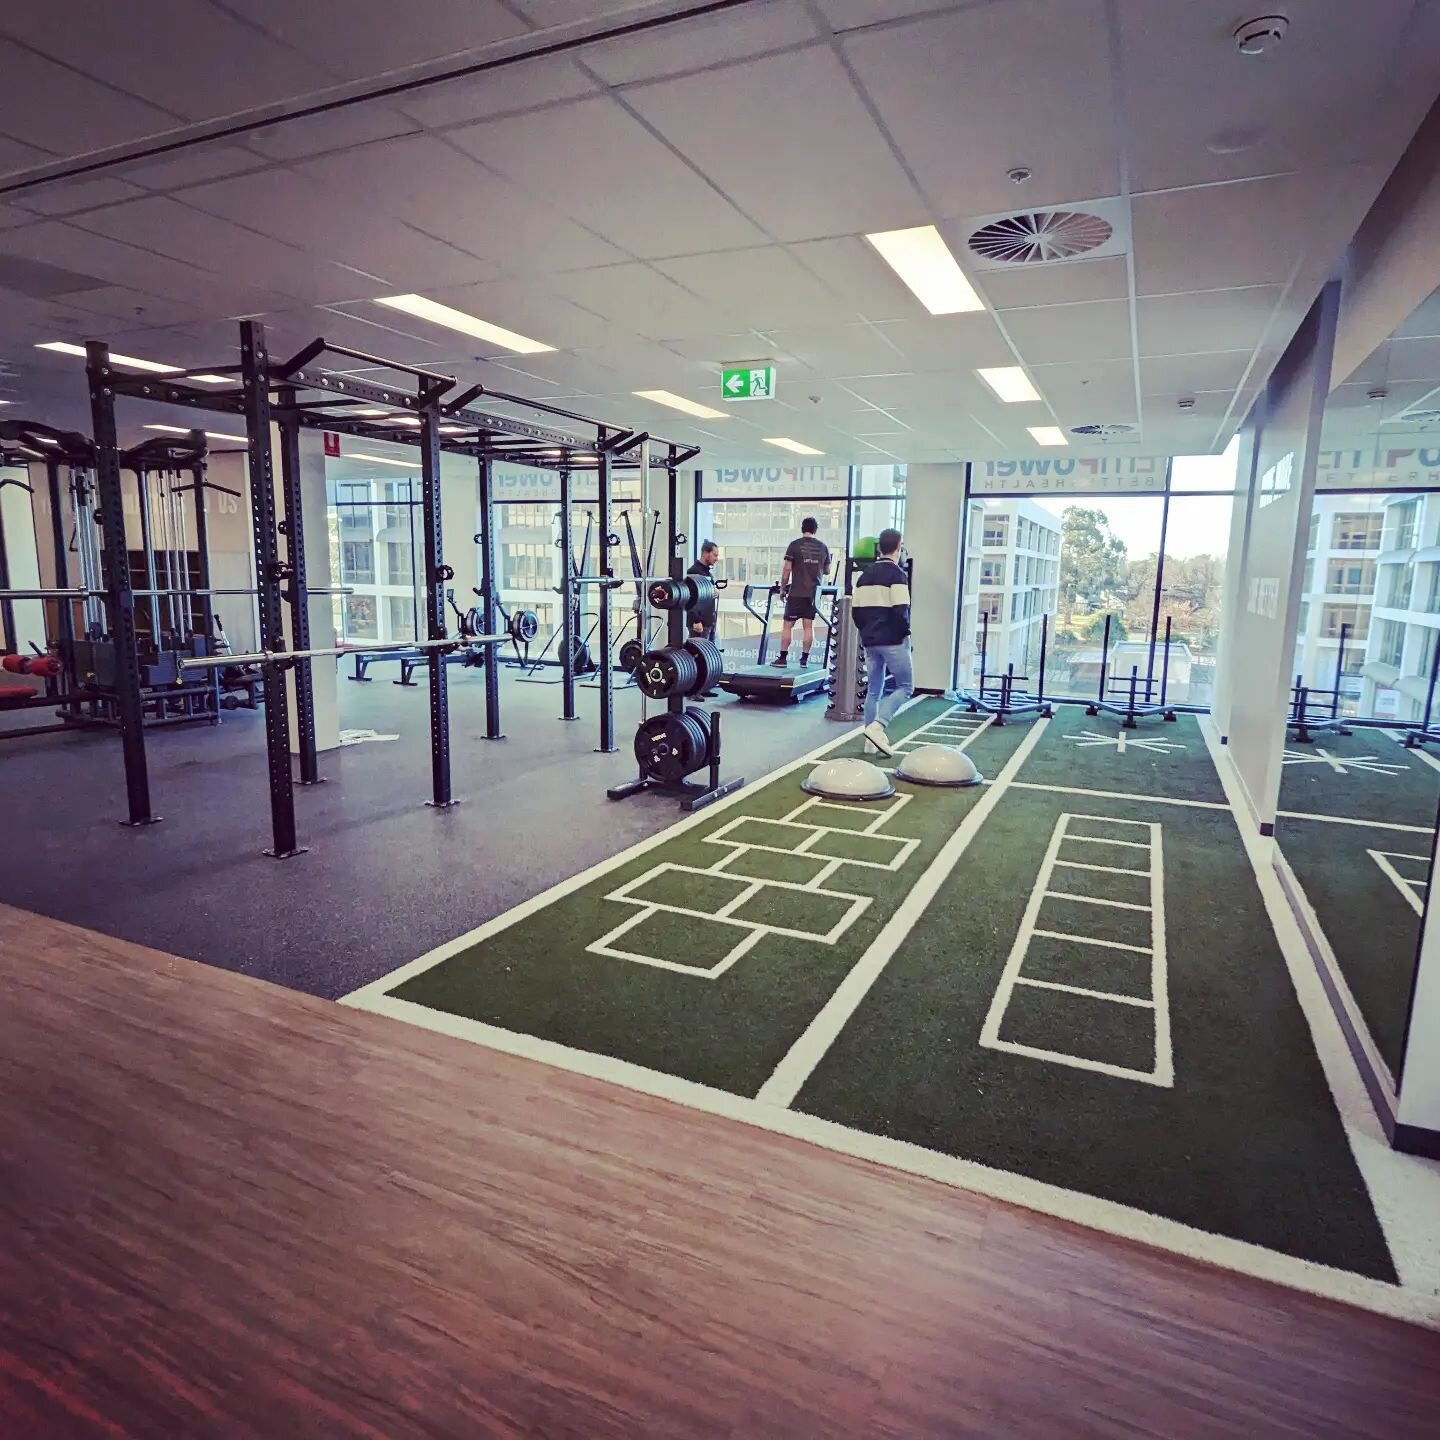 A sneak peek at the new Dickson digs.

One week to go!

Diary is open and bookings are flowing in

@empower.betterhealth
www.empowerbetterhealth.com.au